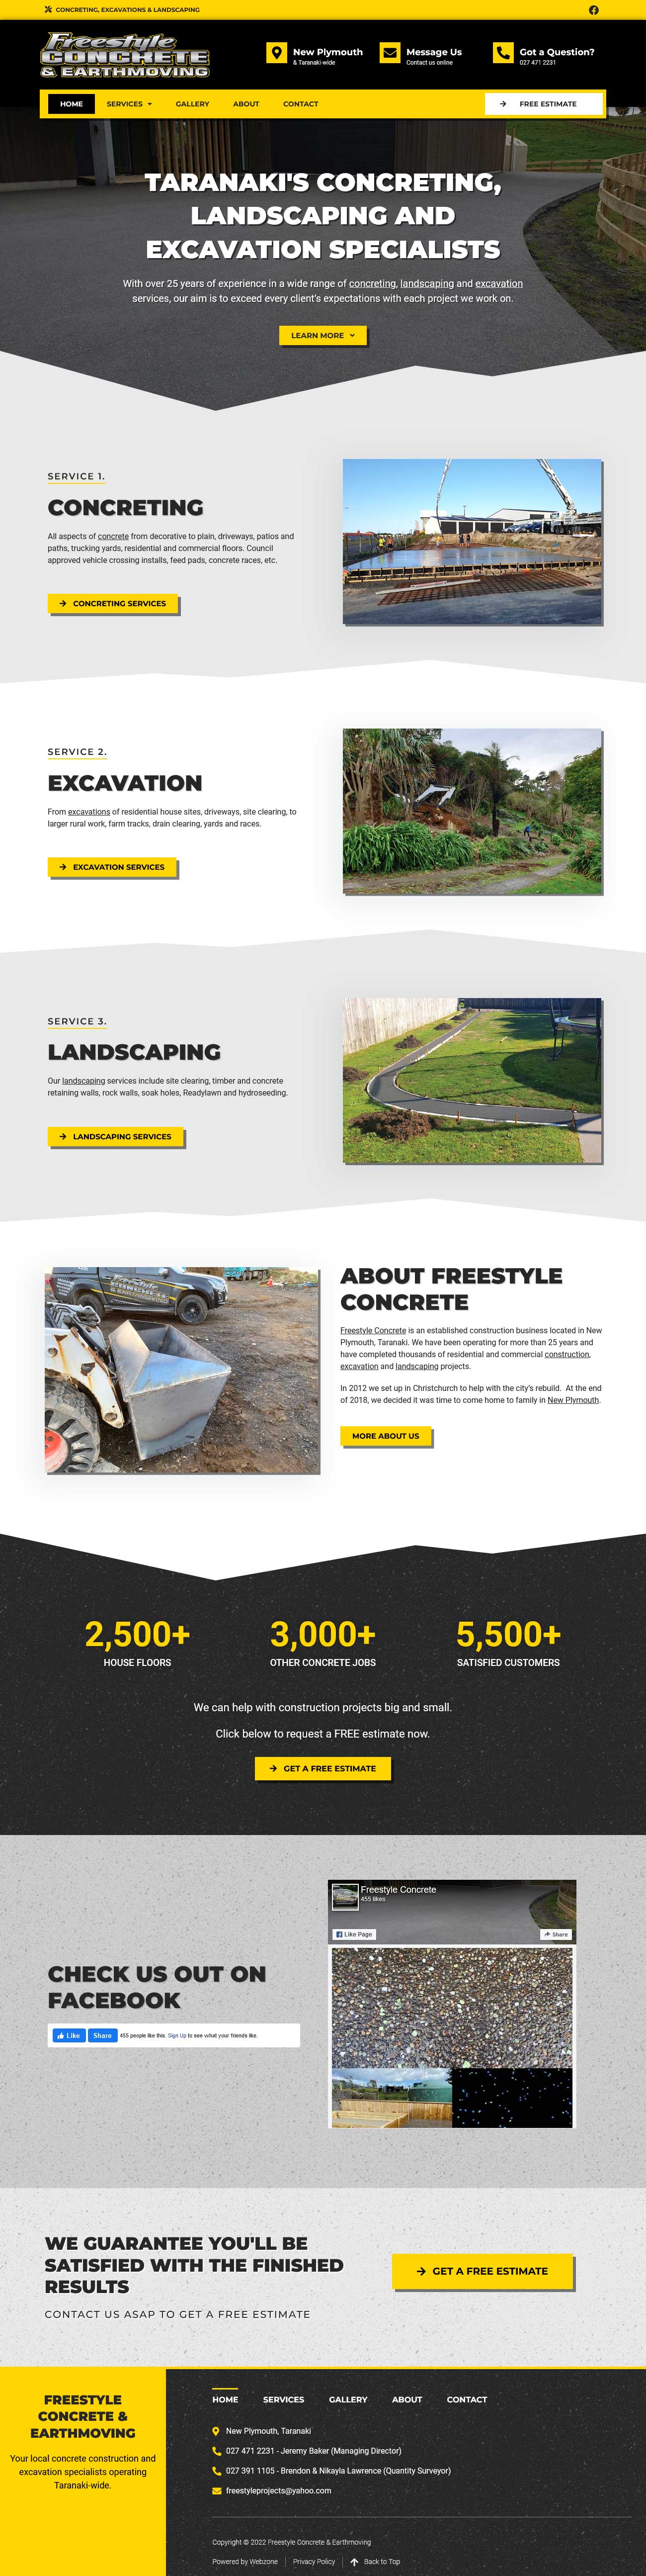 Freestyle Concrete Website (Full View)